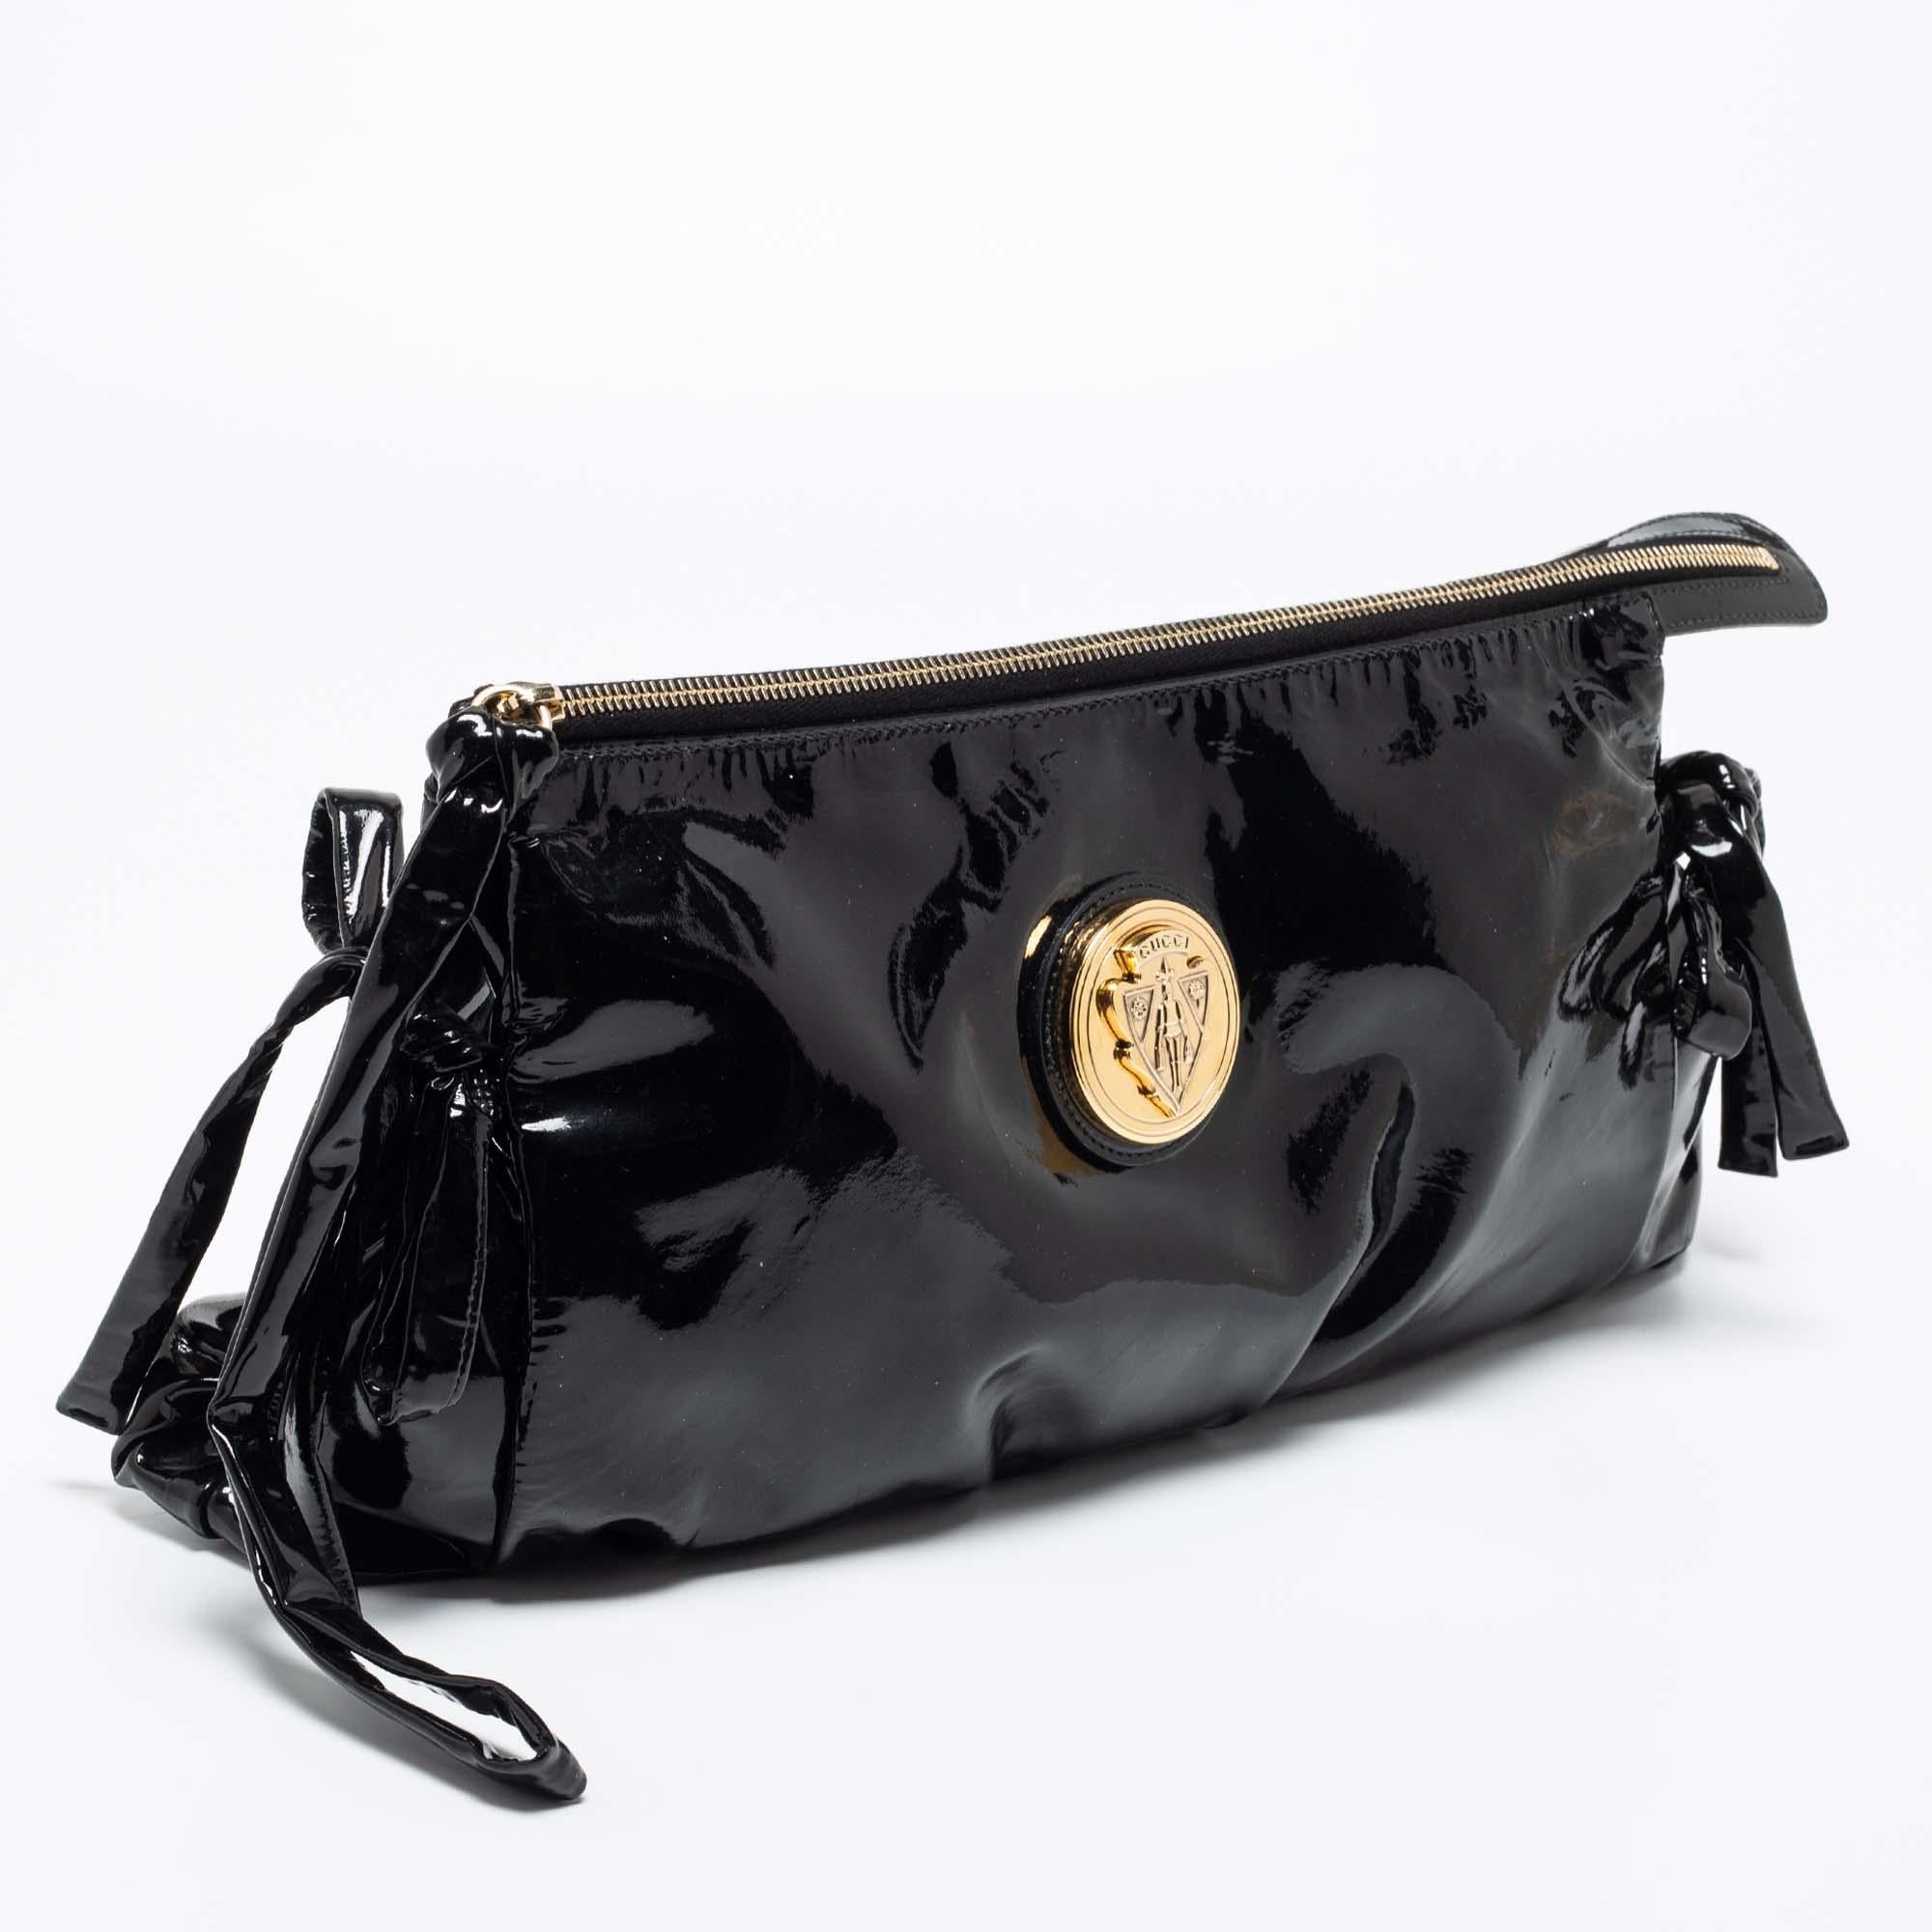 Women's Gucci Black Patent Leather Large Hysteria Clutch